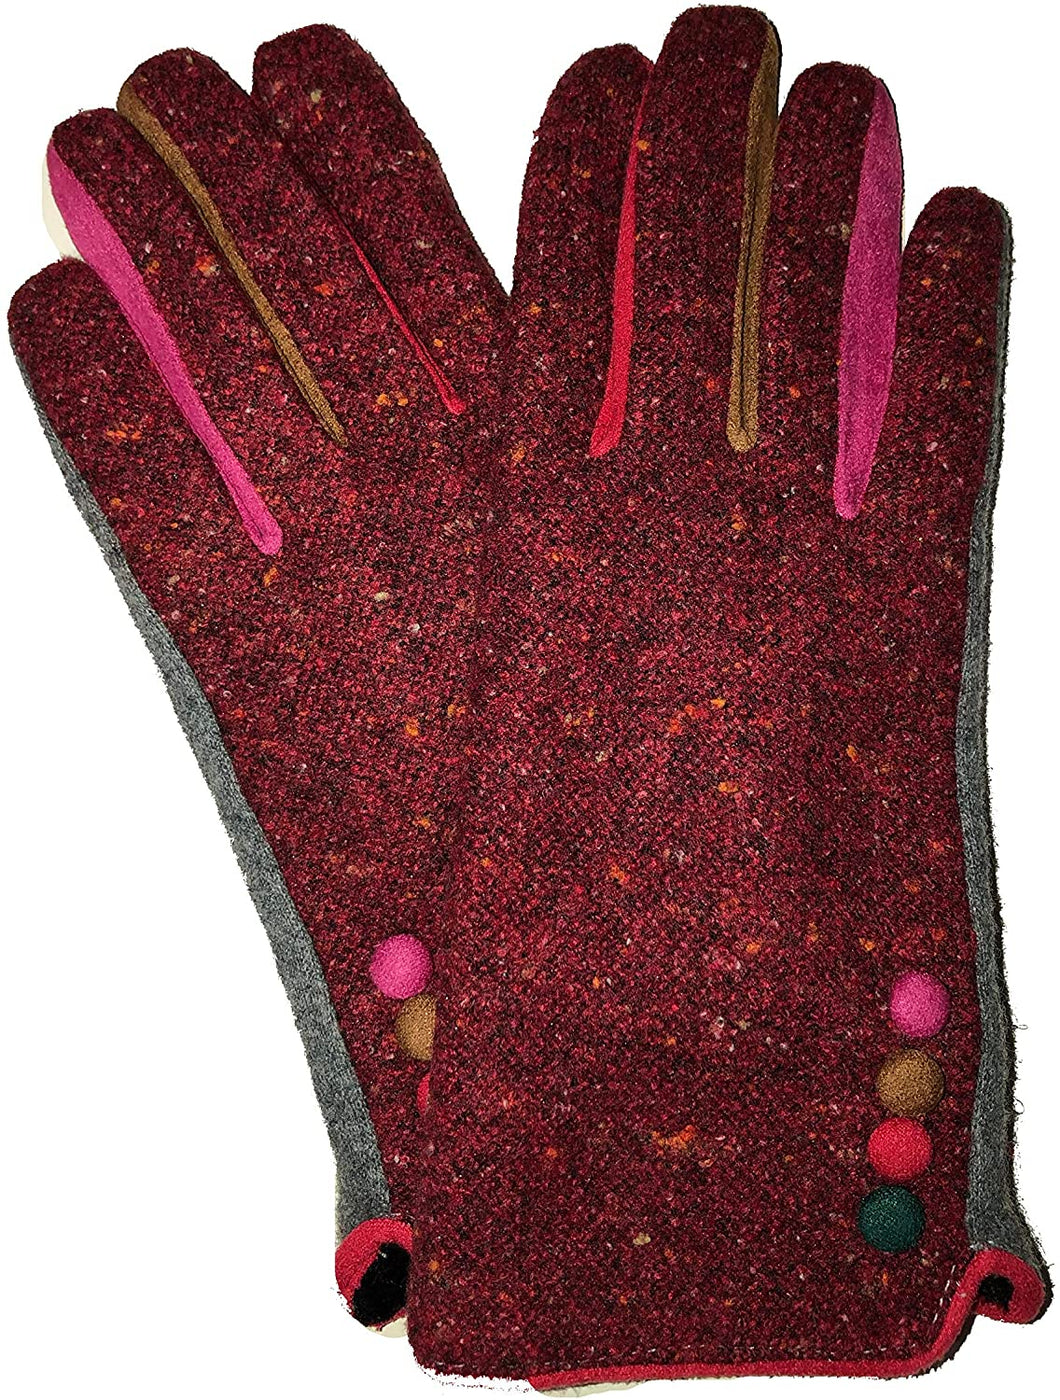 G1918 Speckled pattern super soft ladies stylish gloves with different coloured splashes of colour between fingers.